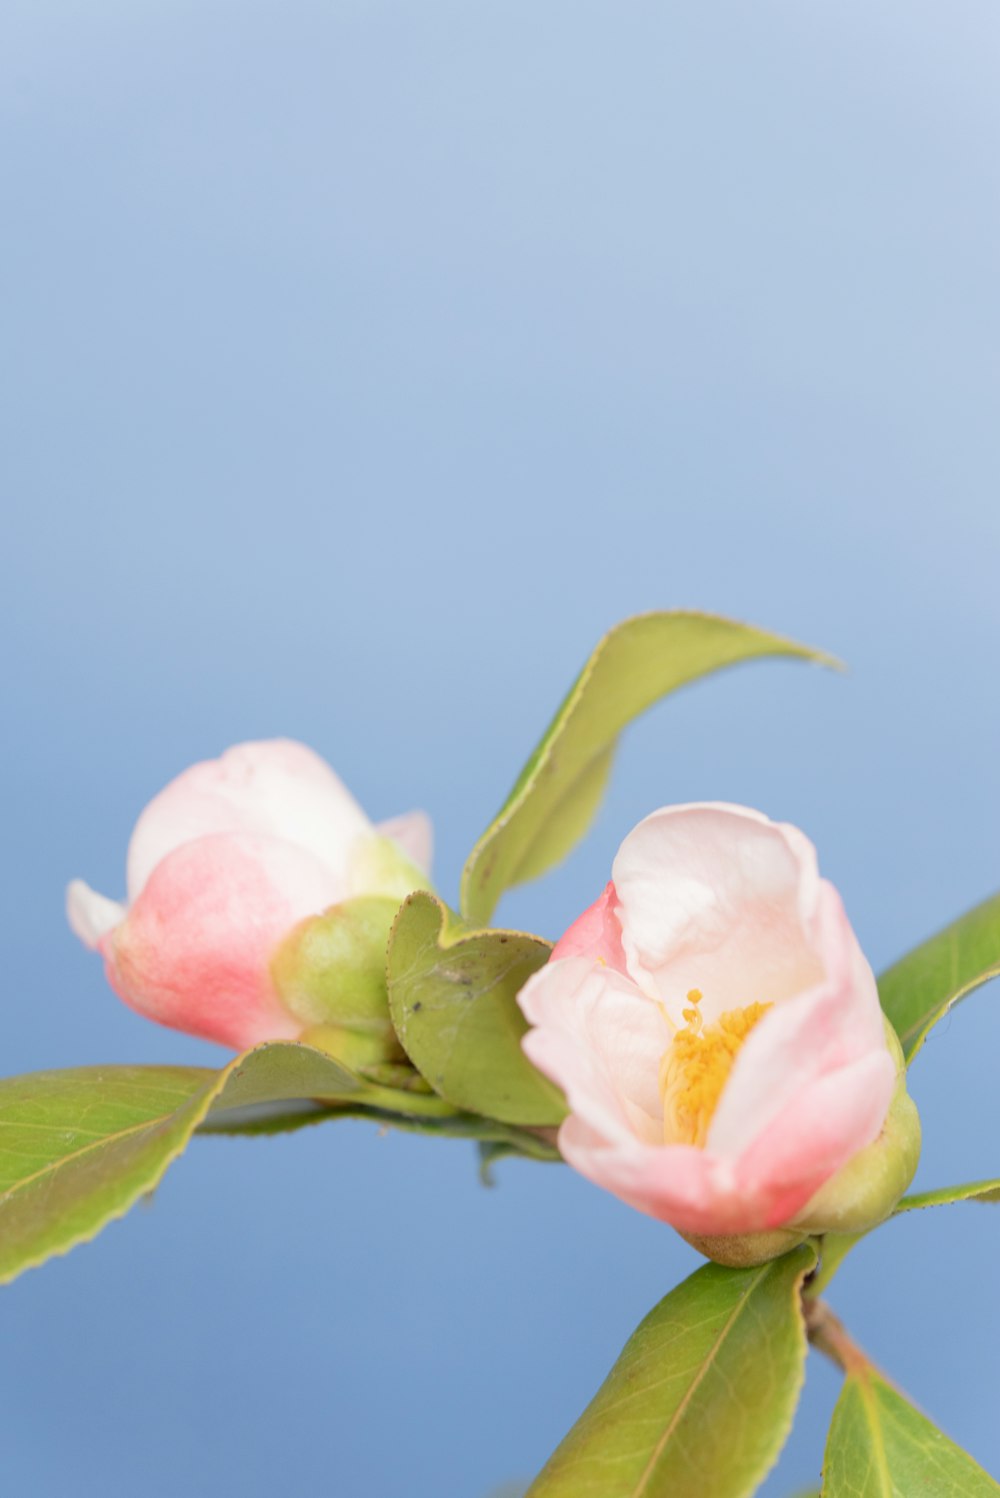 two pink flowers with green leaves against a blue sky